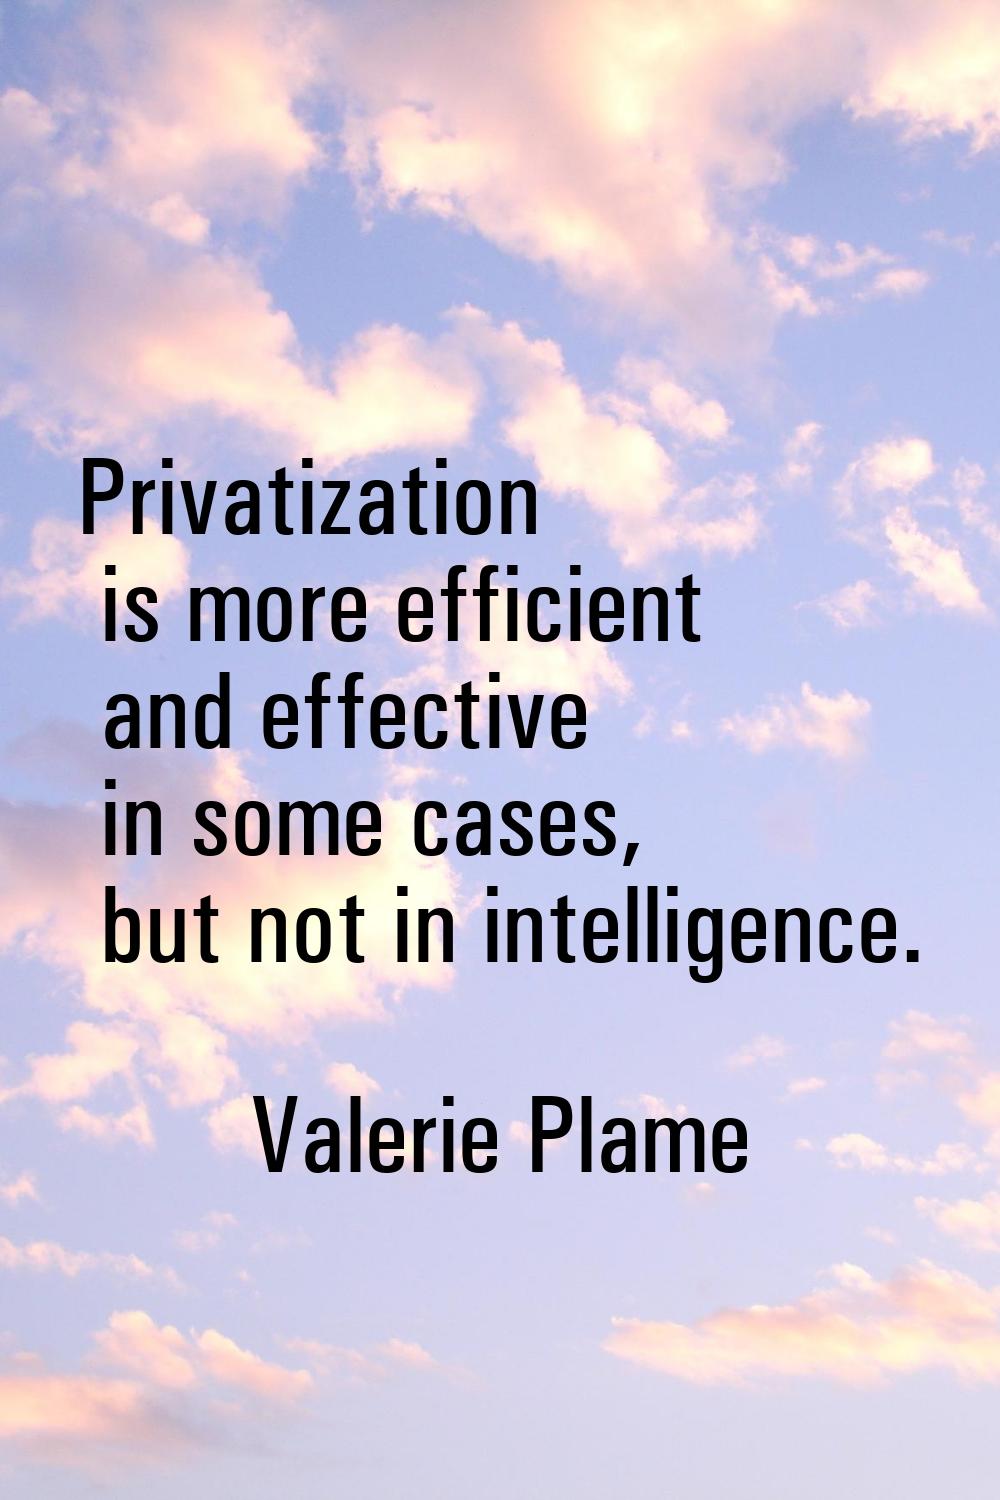 Privatization is more efficient and effective in some cases, but not in intelligence.